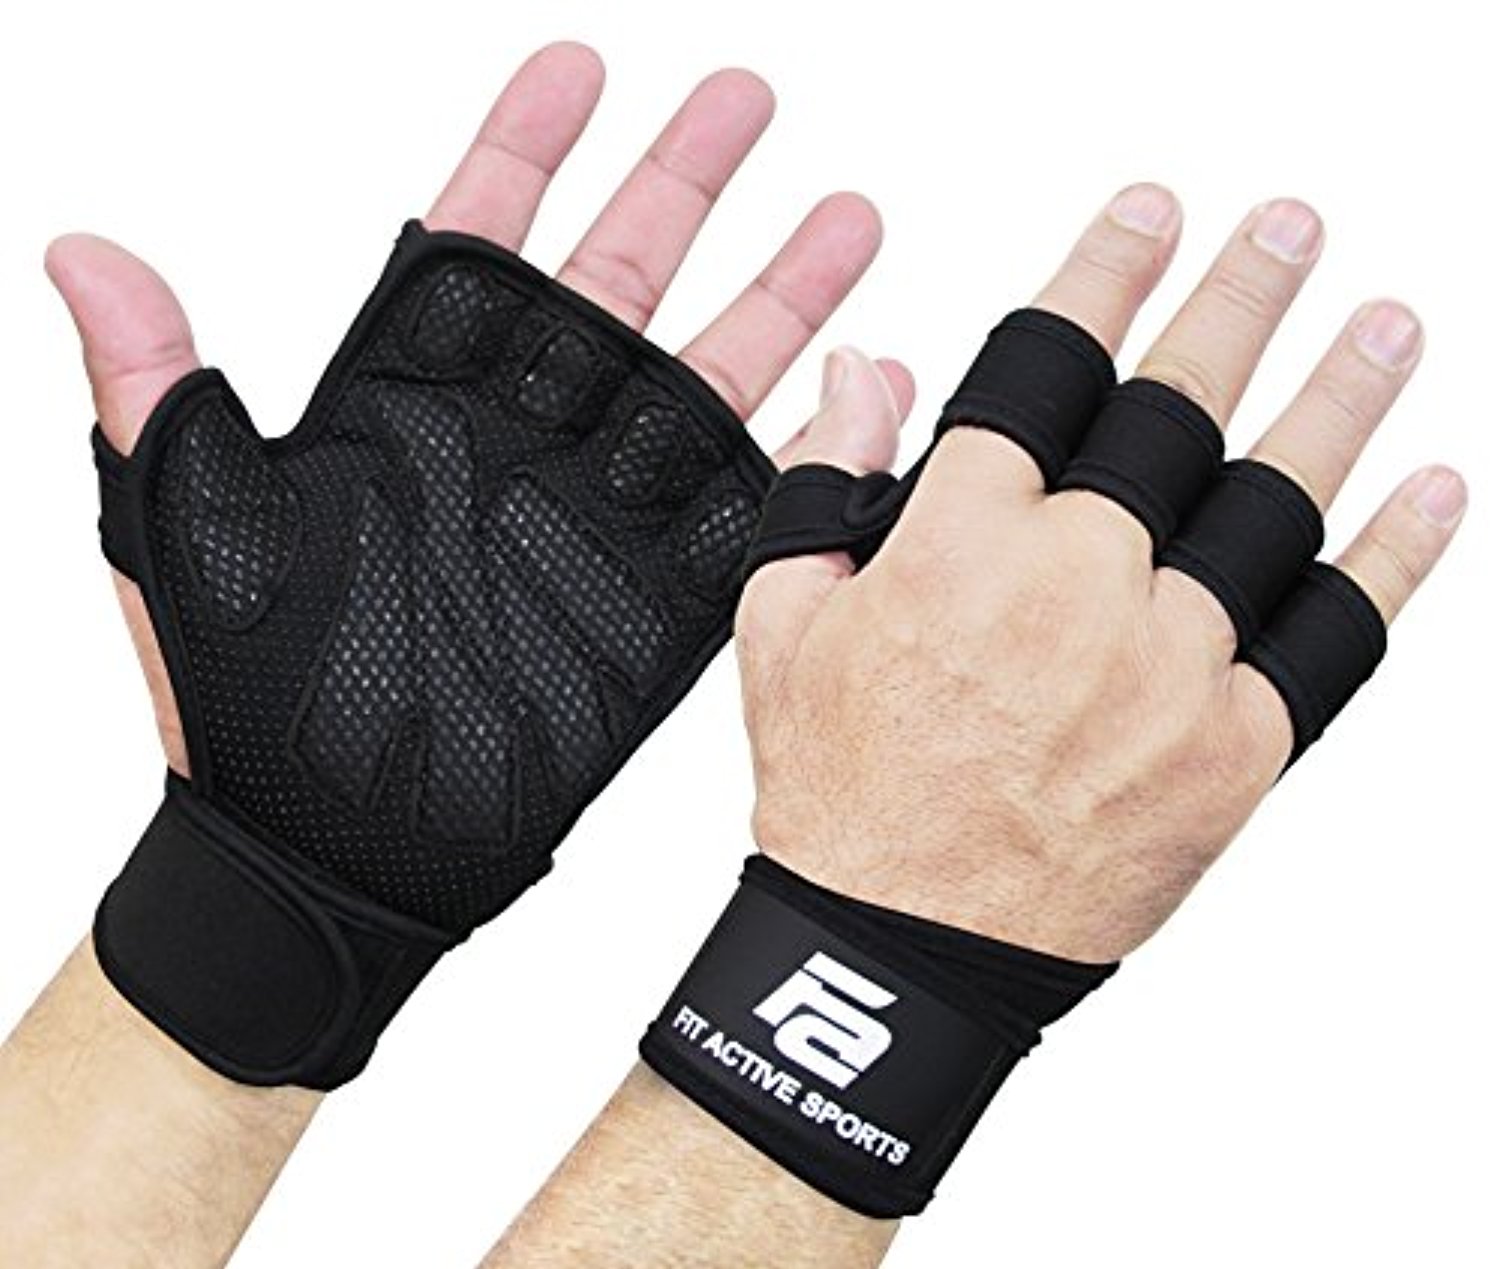 Ventilated Weight Lifting Gloves with Built-In Wrist Wraps. Full Palm Protection - Everyday Crosstrain